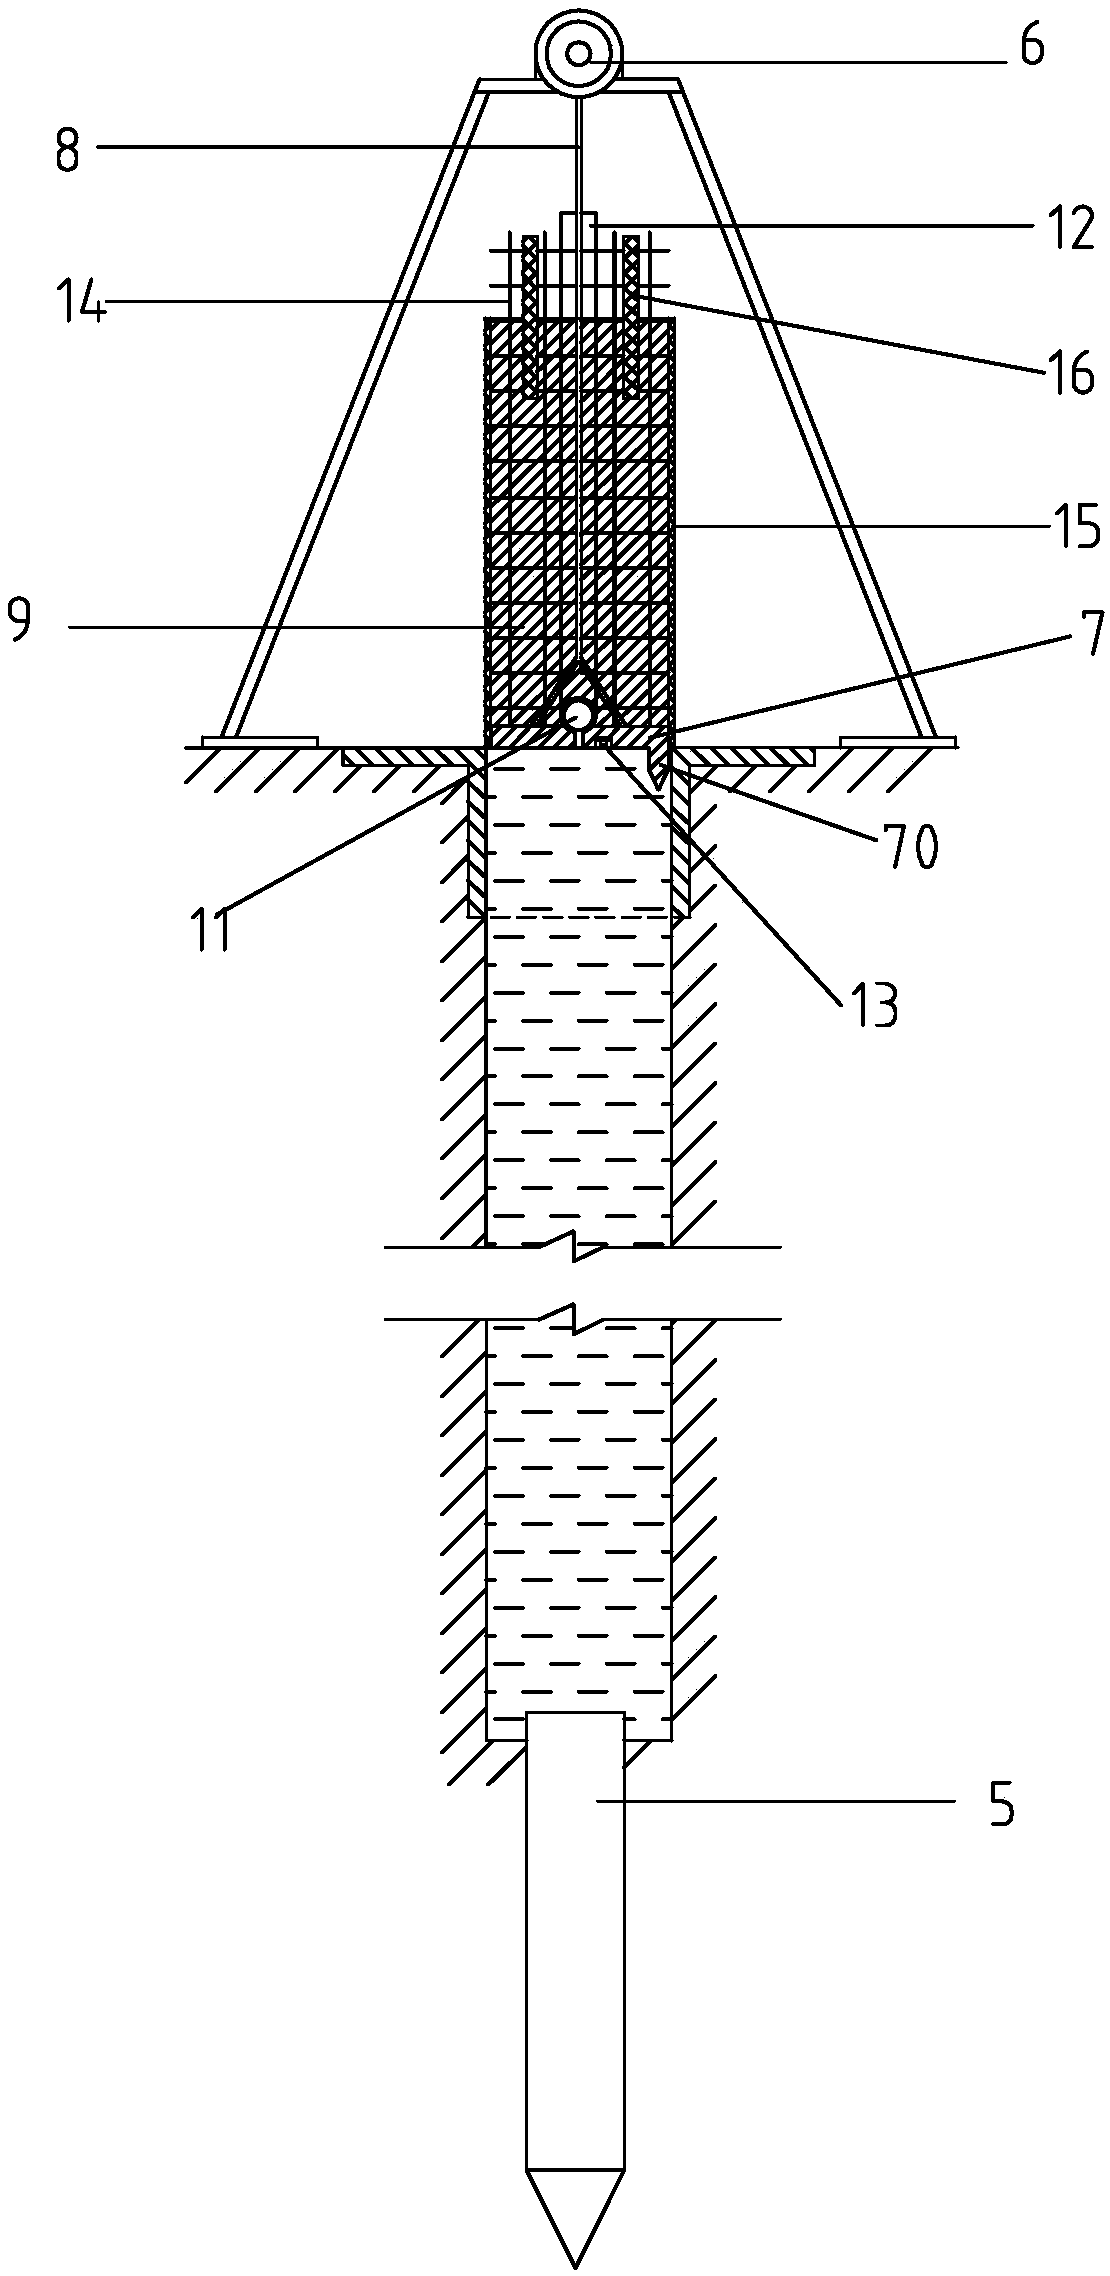 Original-soil and in-situ slurrying-based underground wall construction method